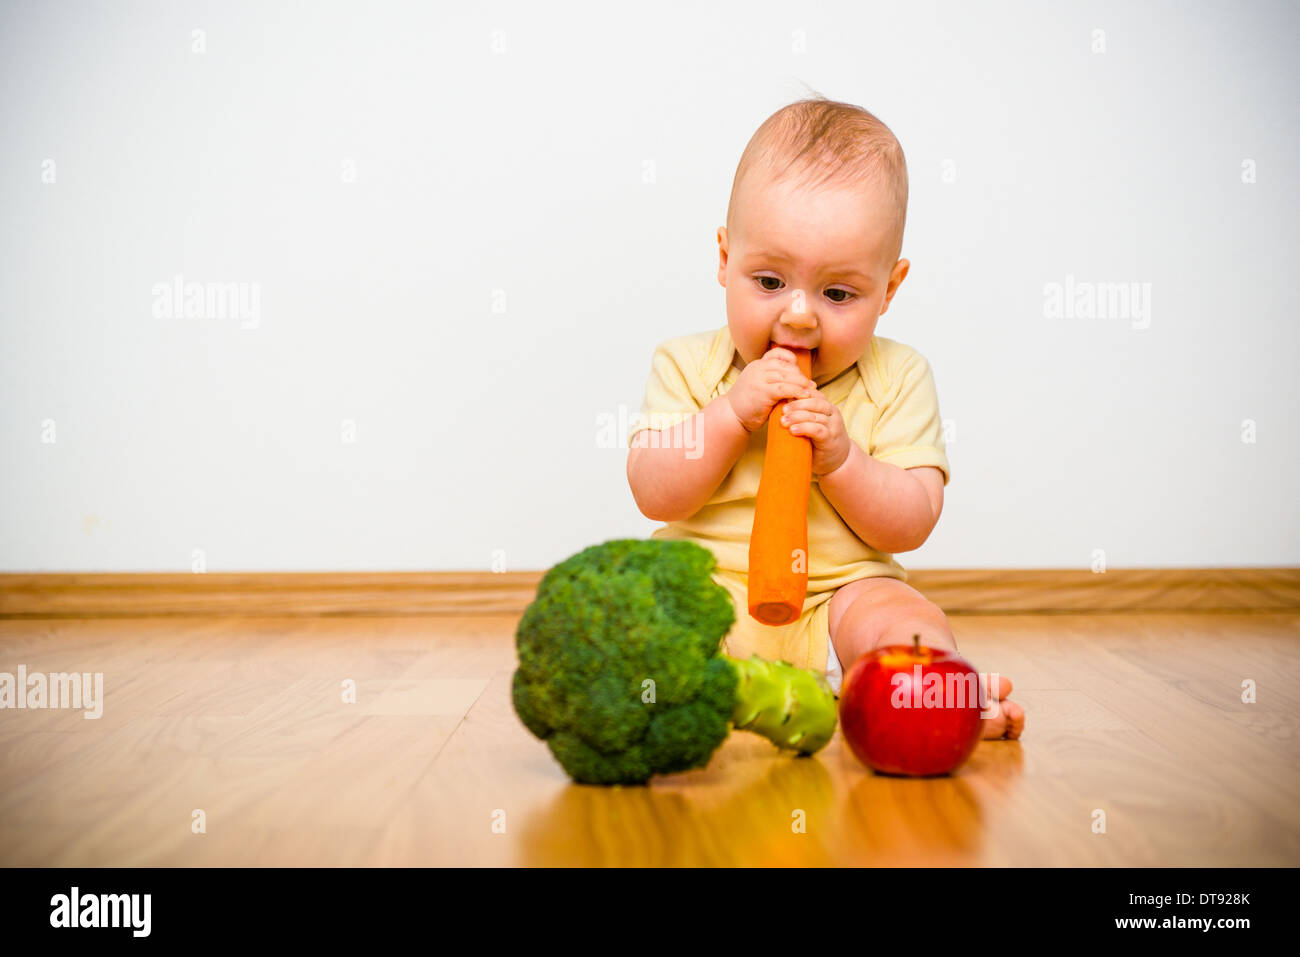 Healthy lifestyle. Baby eating fruit and vegetables - indoors at home Stock Photo